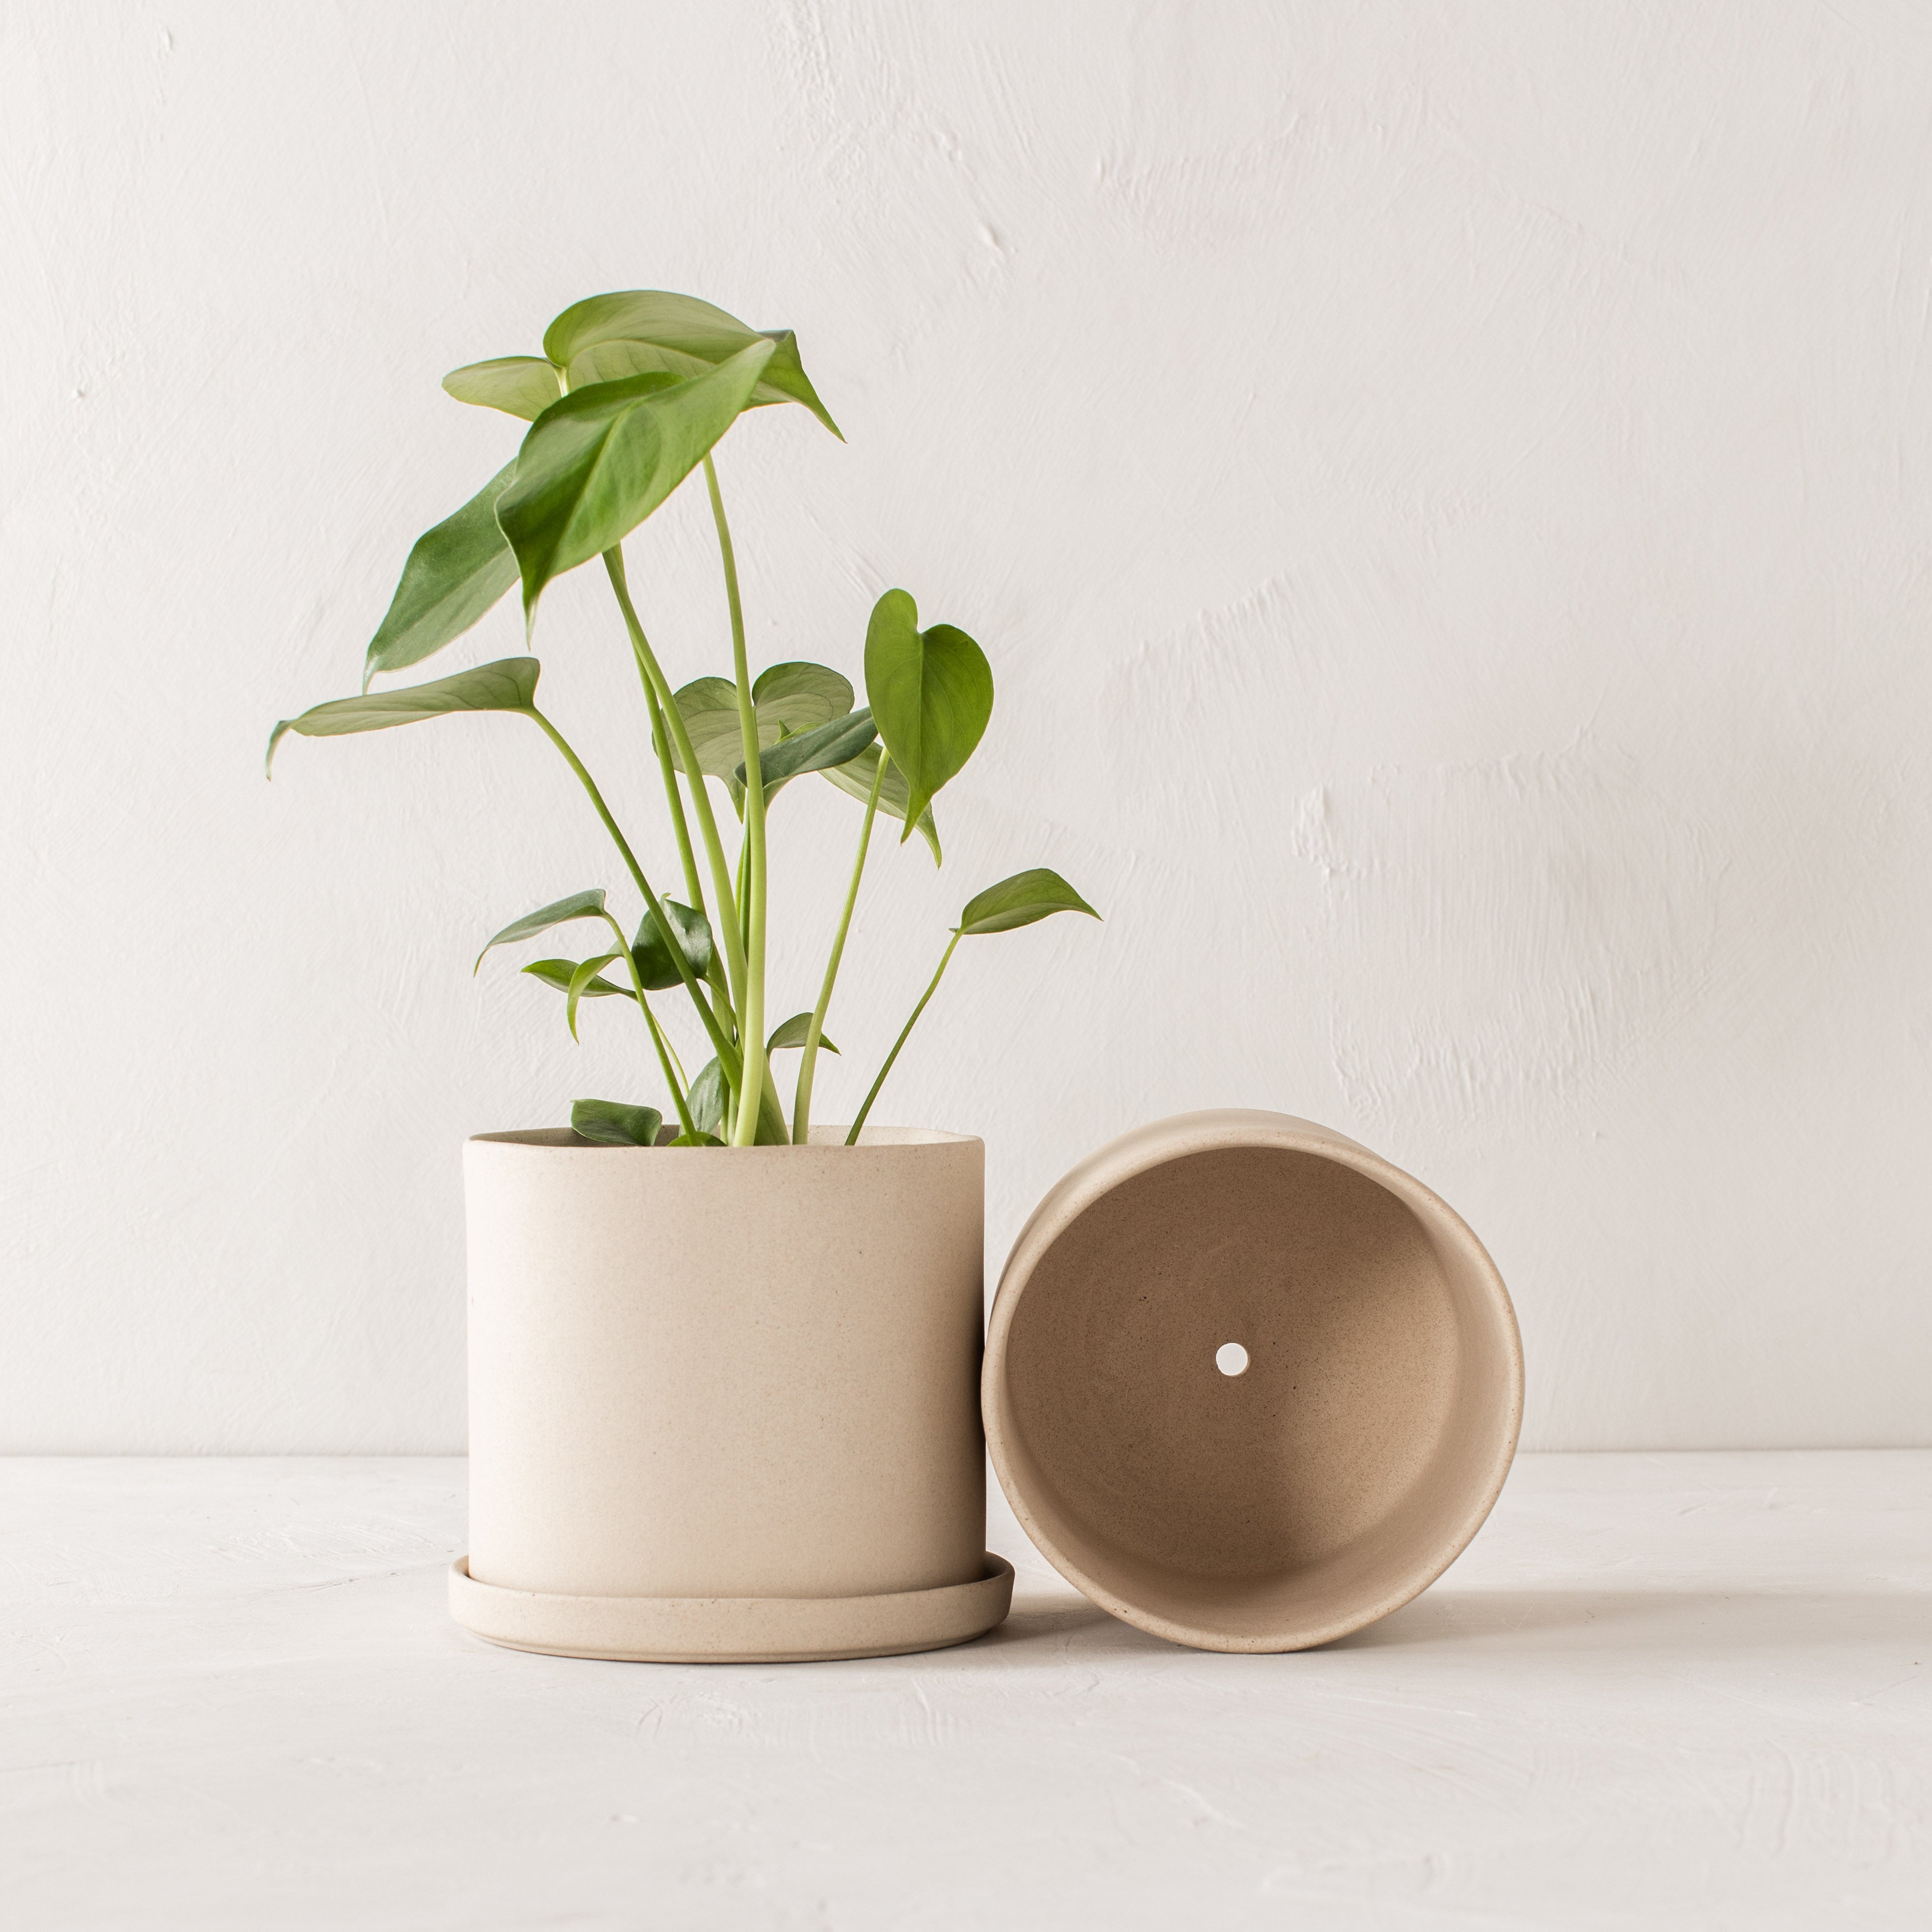 Pair of stoneware planters side by side, one with a drainage dish the other lay on its side shows its drainage hole. Upright planter has a 6 inch monstera inside. Handmade ceramic planters designed and sold by Convivial production. Kansas City ceramics.